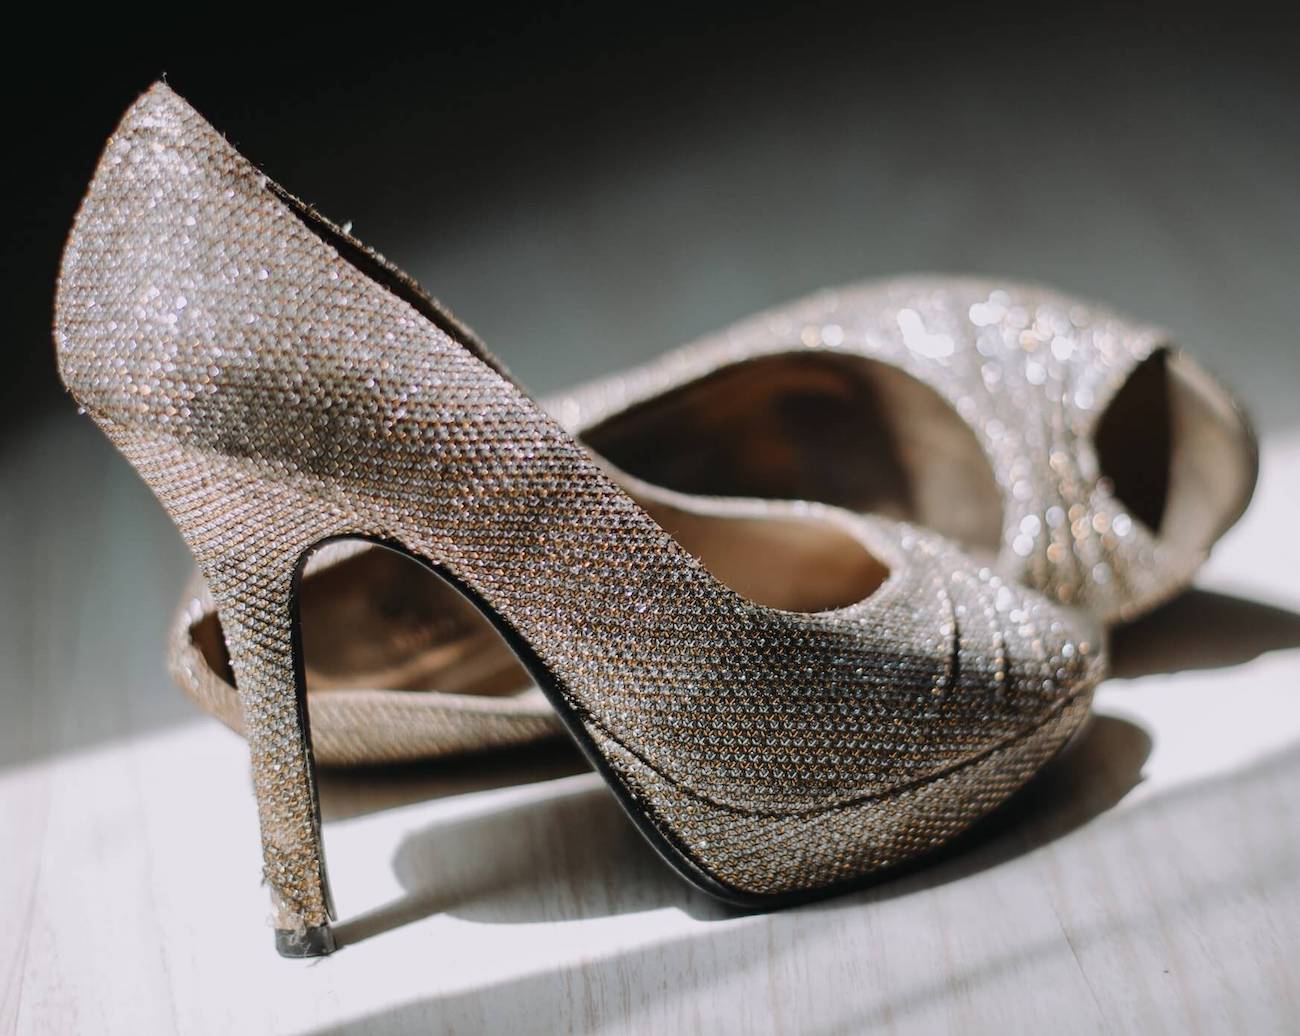 Classic pumps are great to wear for prom